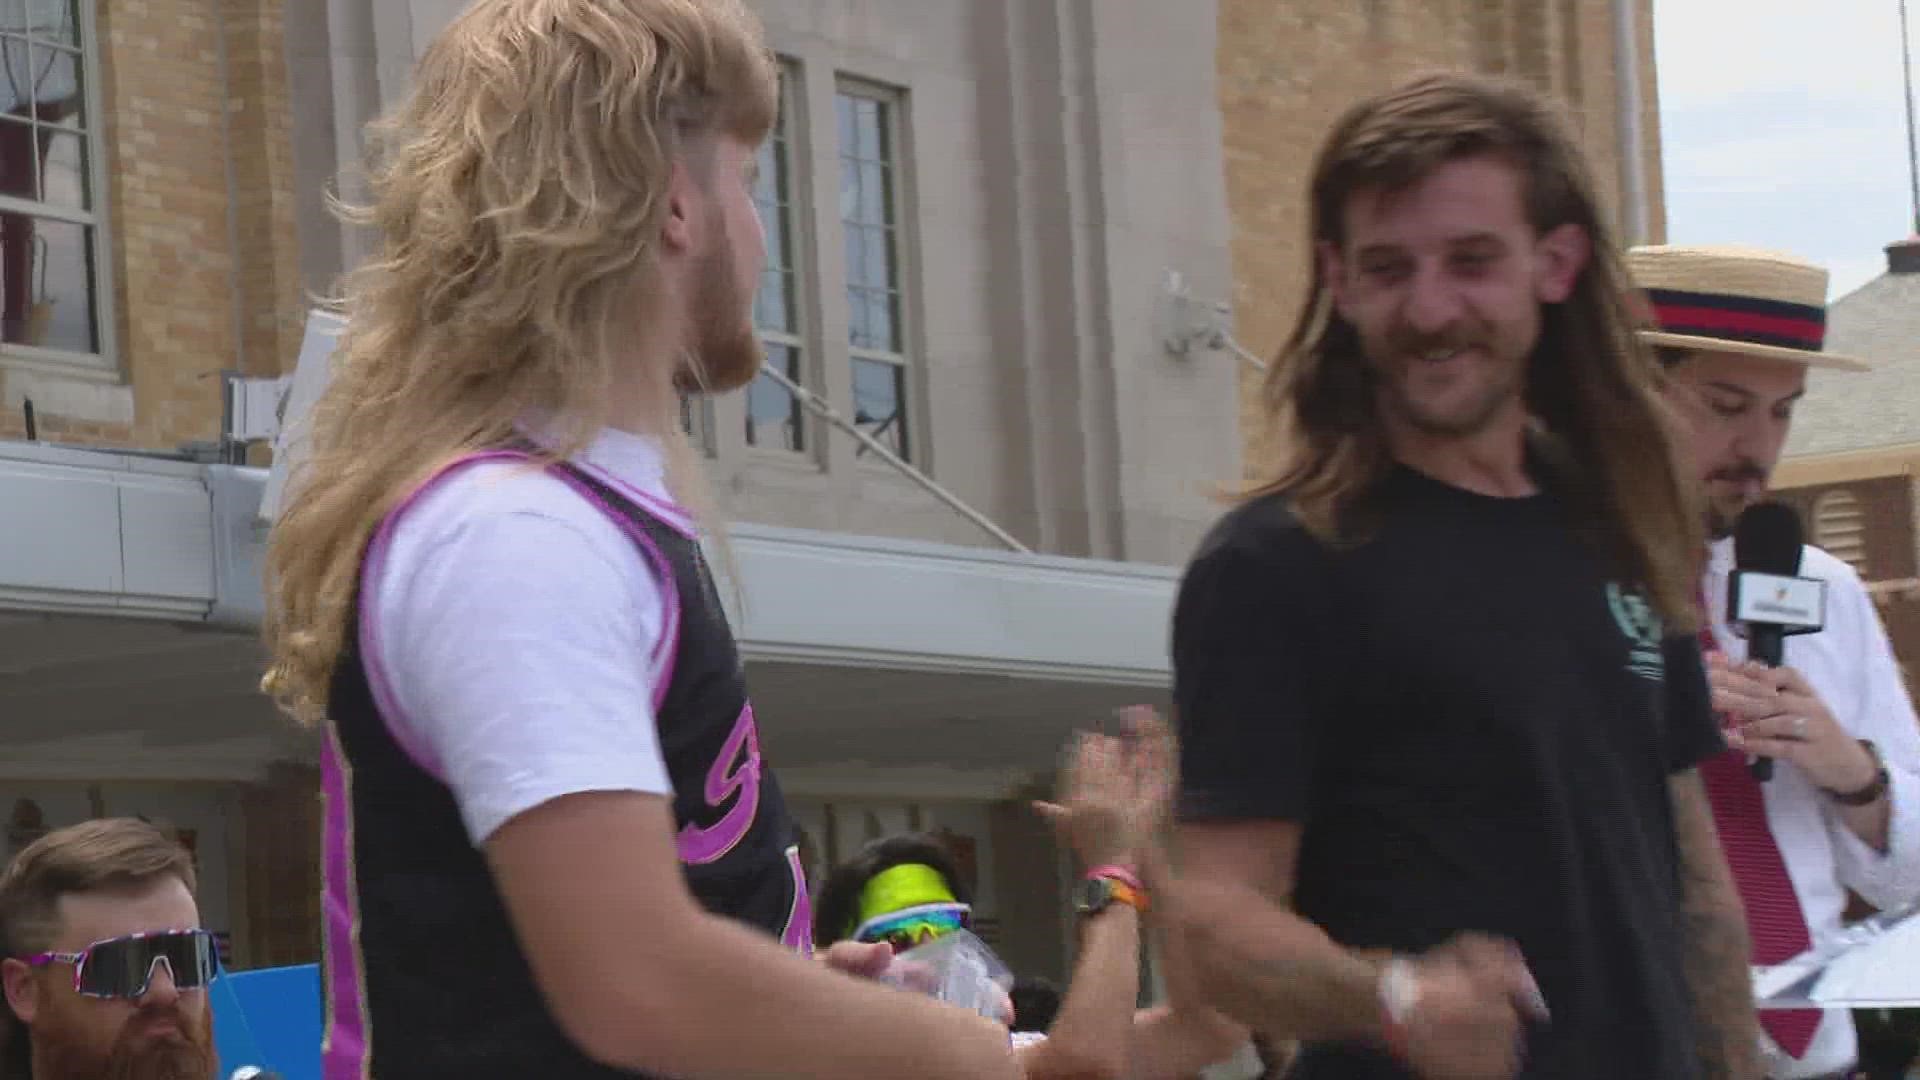 Cancer survivor wins "Best Mullet" at Indiana State Fair this year